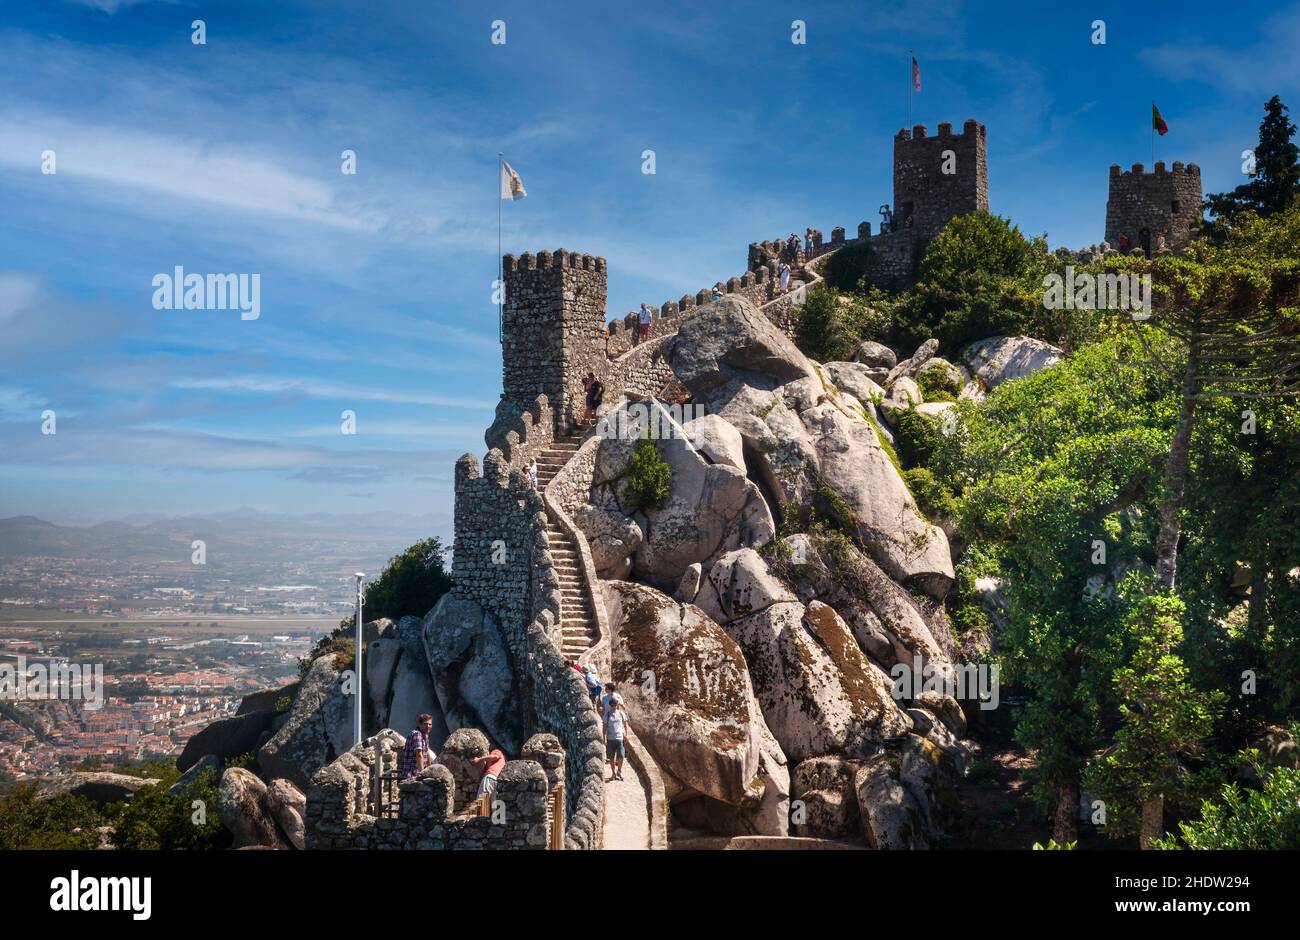 View of the wall and towers of the ruins of the Castelo do Mouros (Moorish Castle) in the Portuguese town of Sintra. Stock Photo